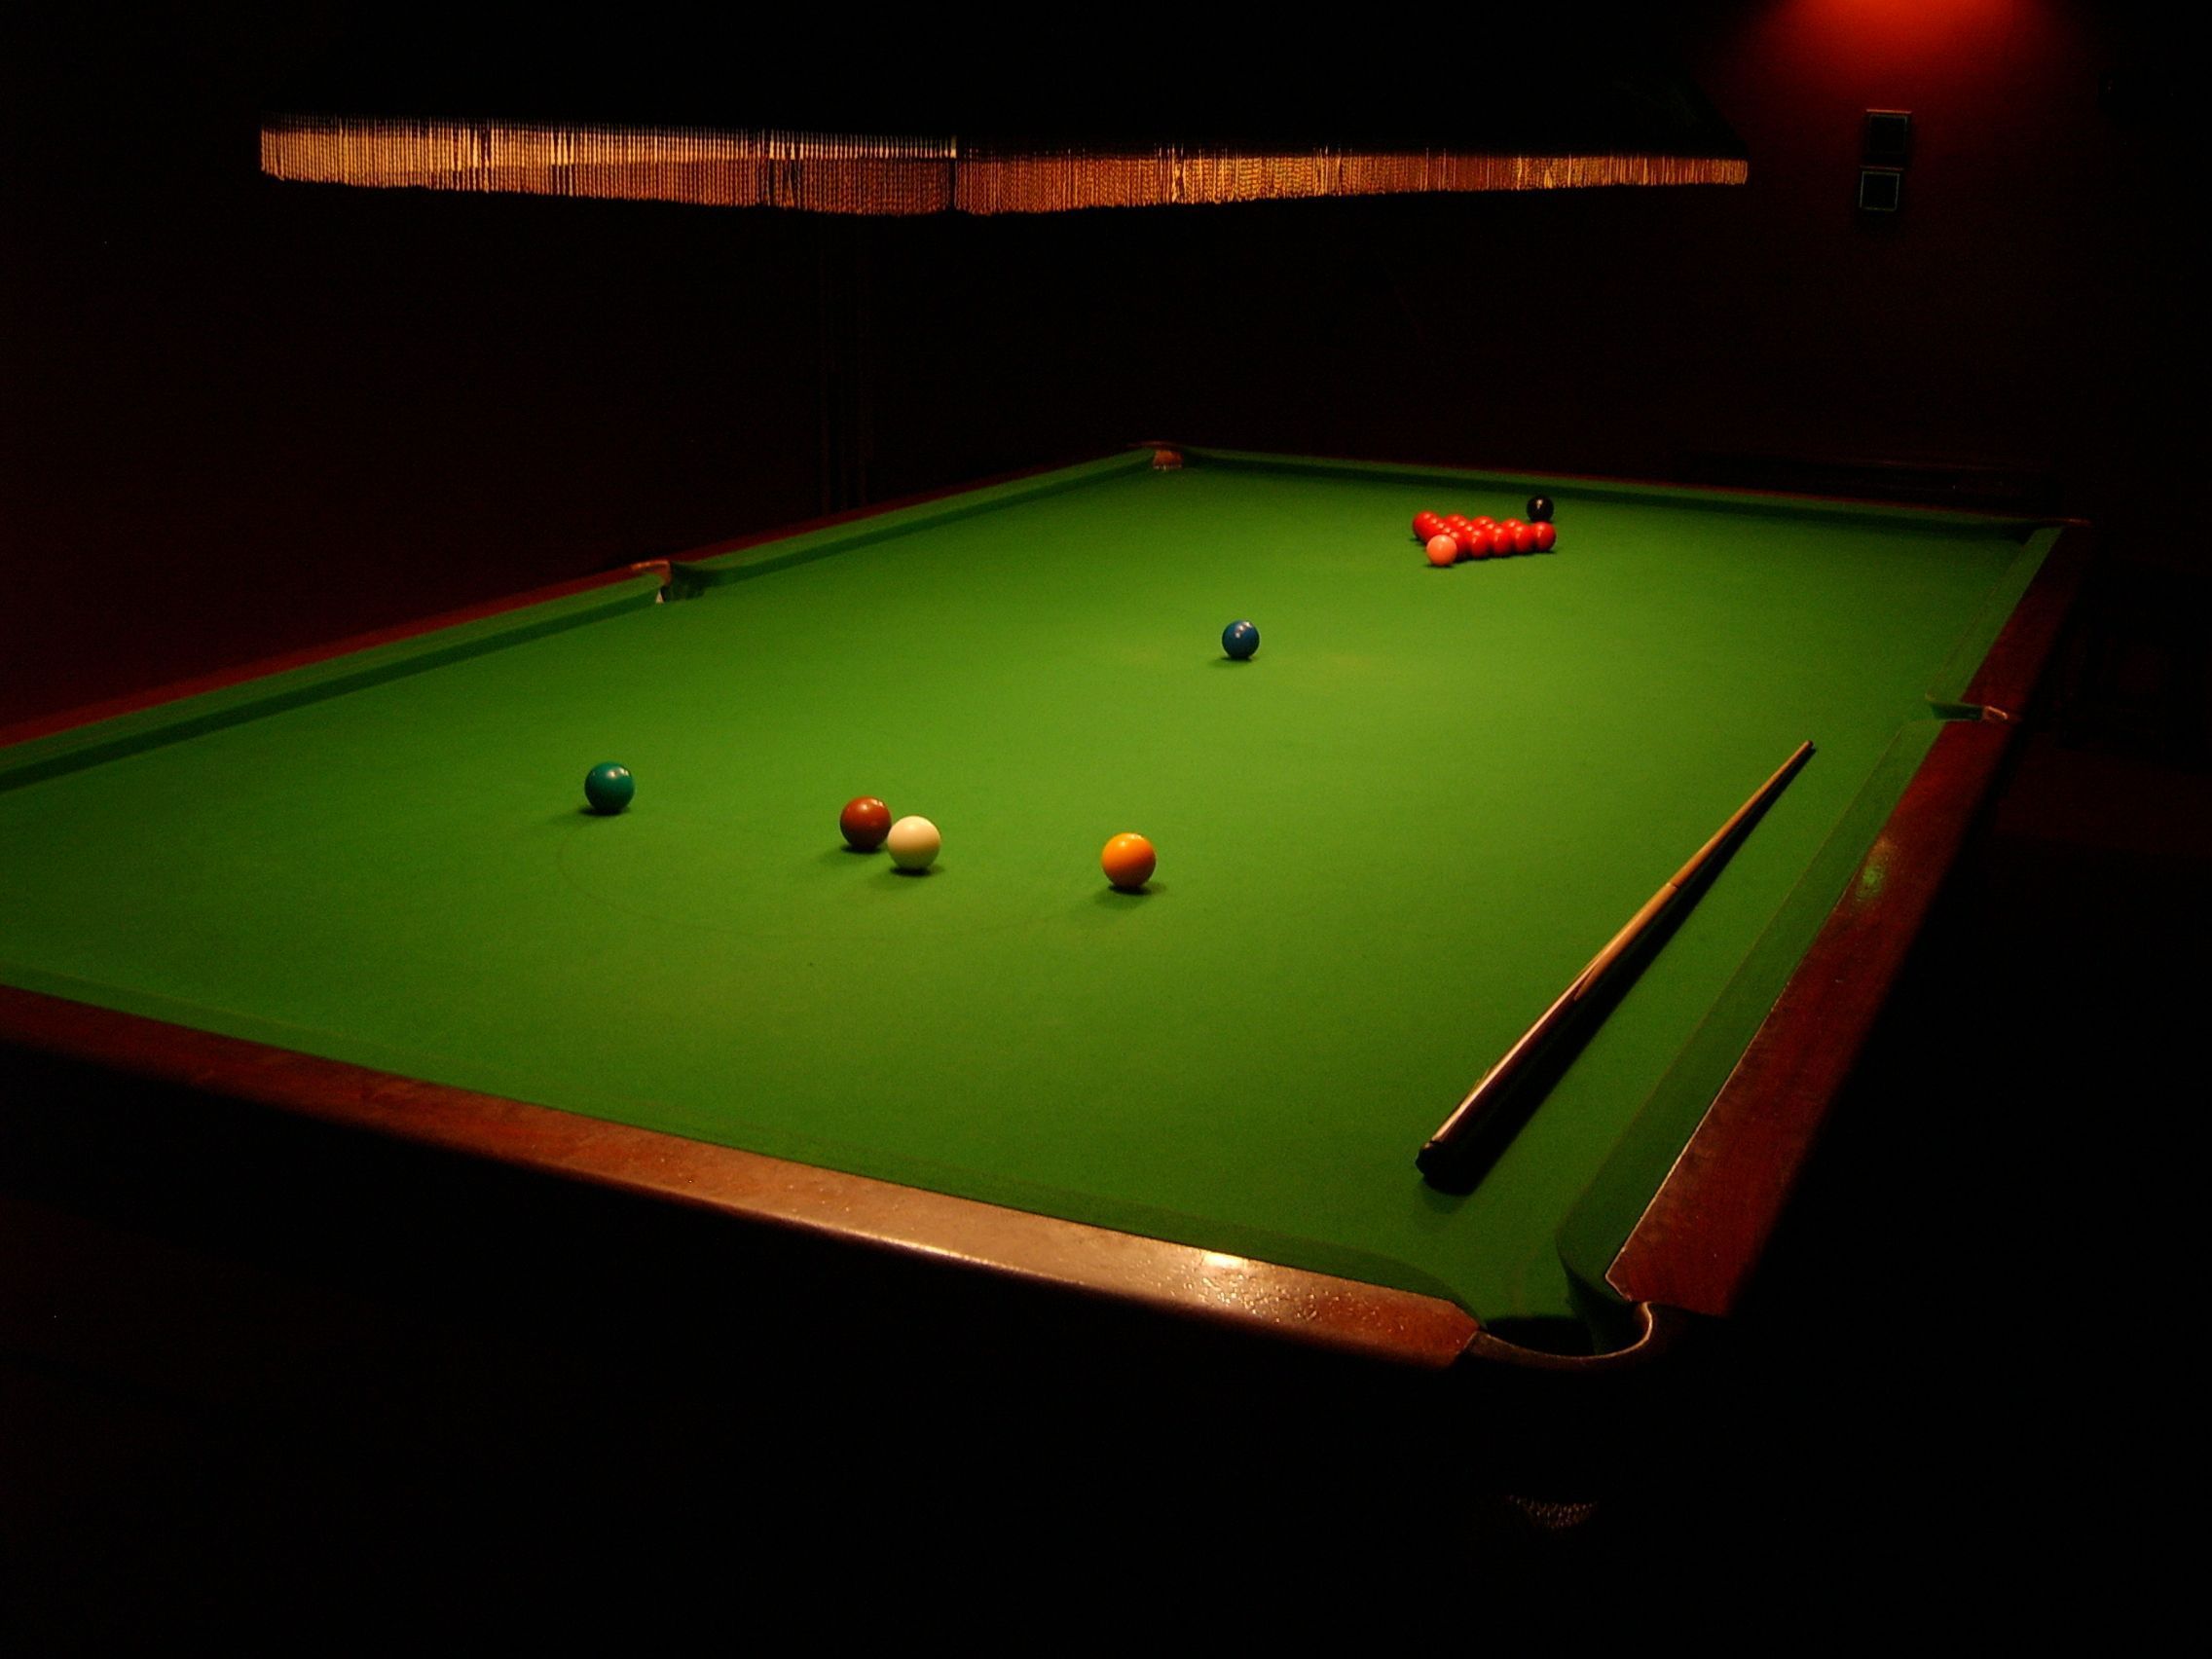 Billiards, snooker wallpapers and images - wallpapers, pictures ...